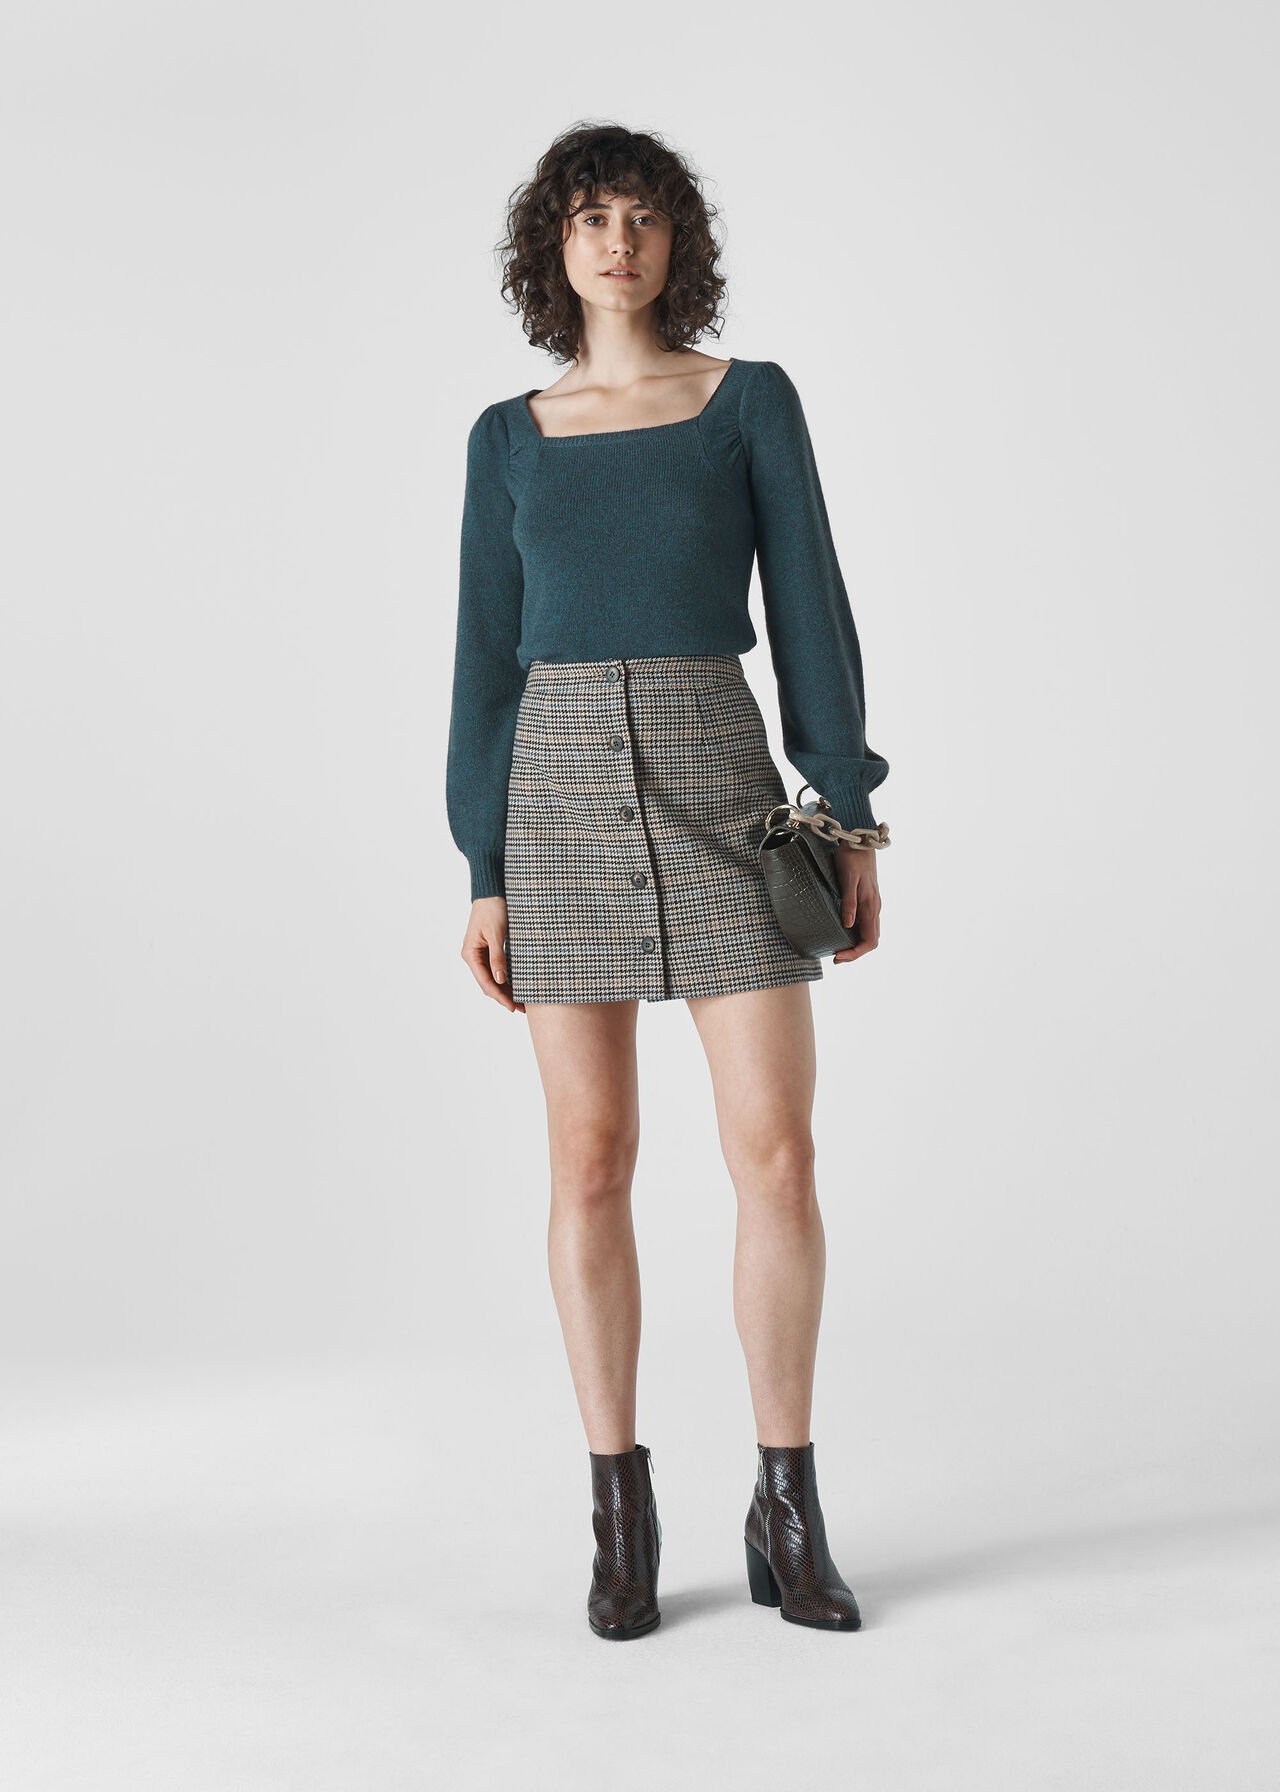 Teal Yak Mix Square Neck Knit | WHISTLES